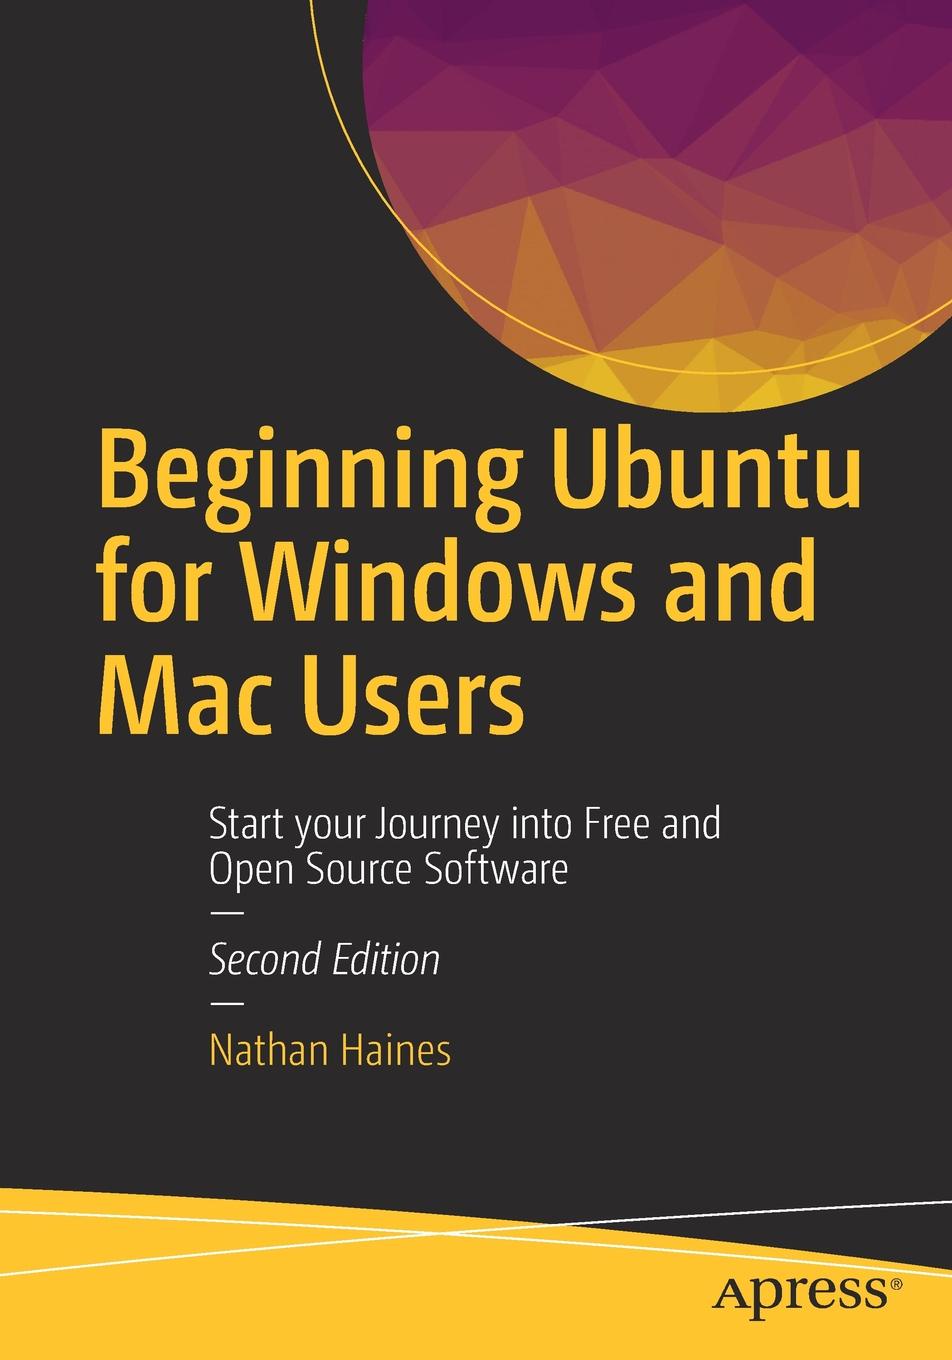 Beginning Ubuntu for Windows and Mac Users. Start your Journey into Free and Open Source Software